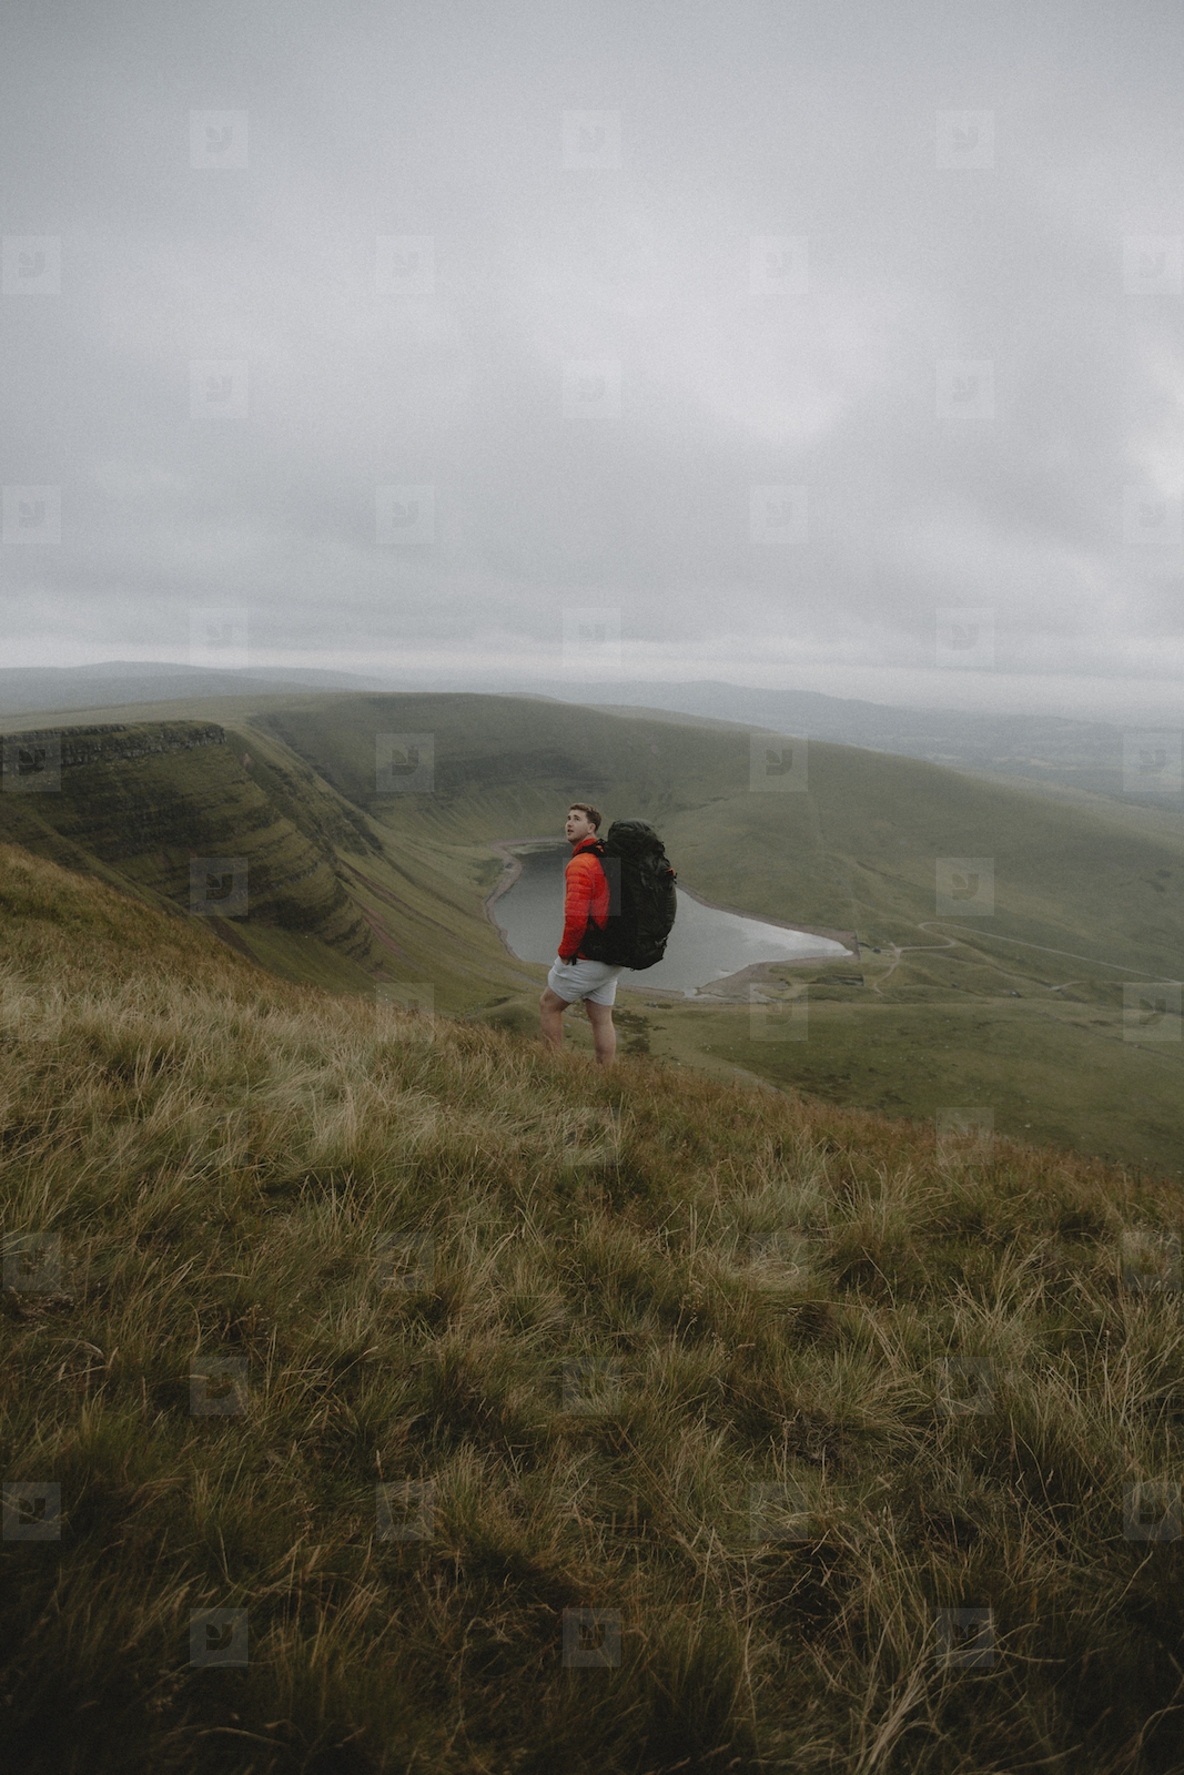 Man with backpack hiking on grassy